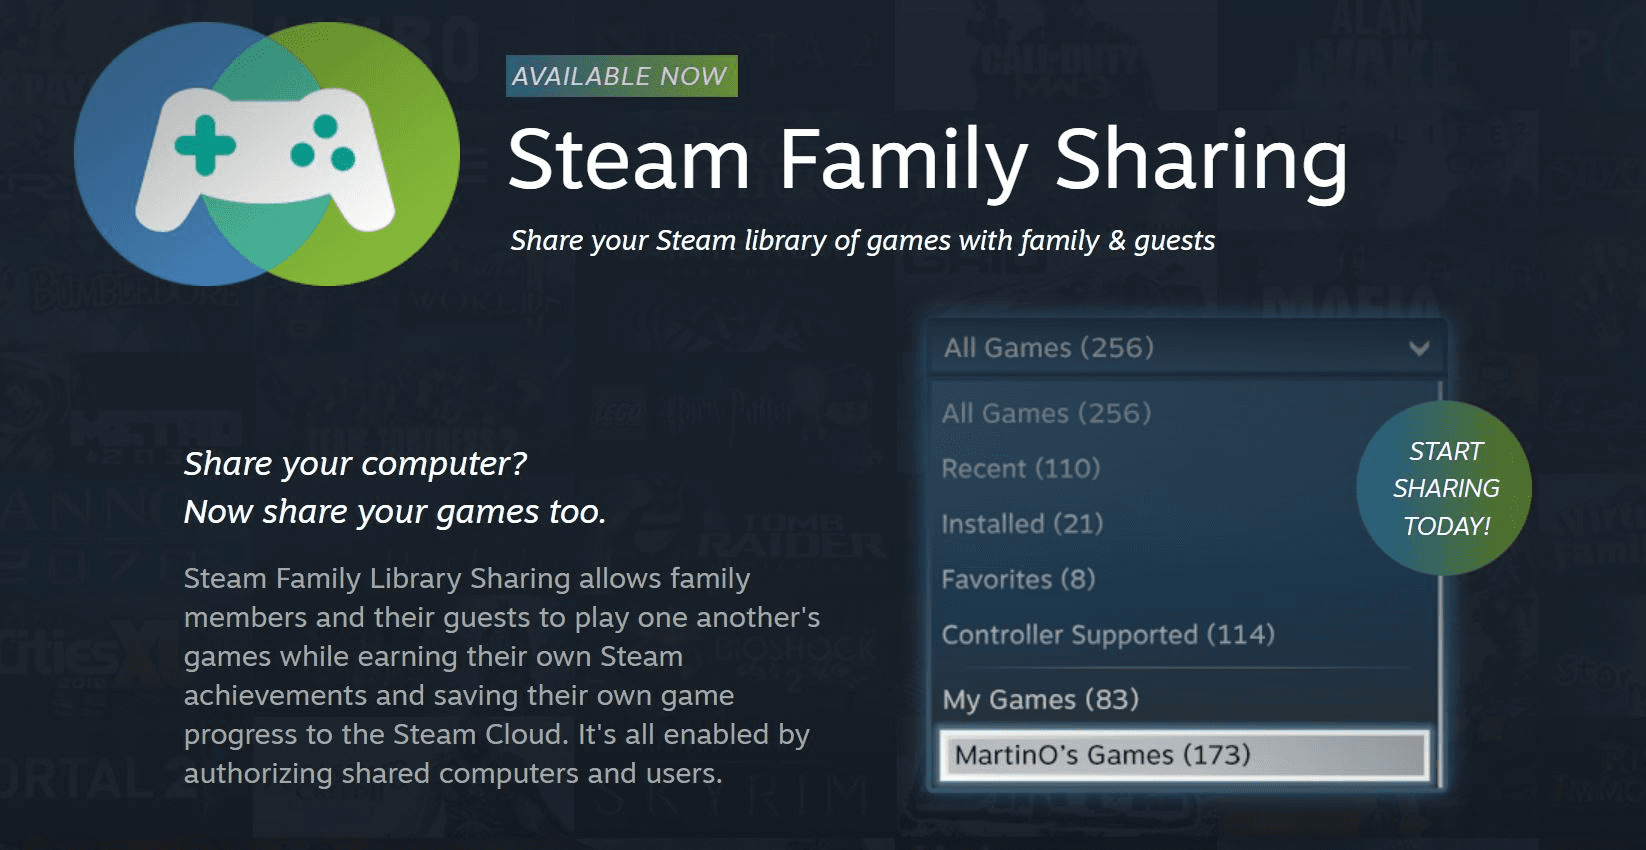 Open the Steam installation folder and install. Share games on the same account and live that tech life.